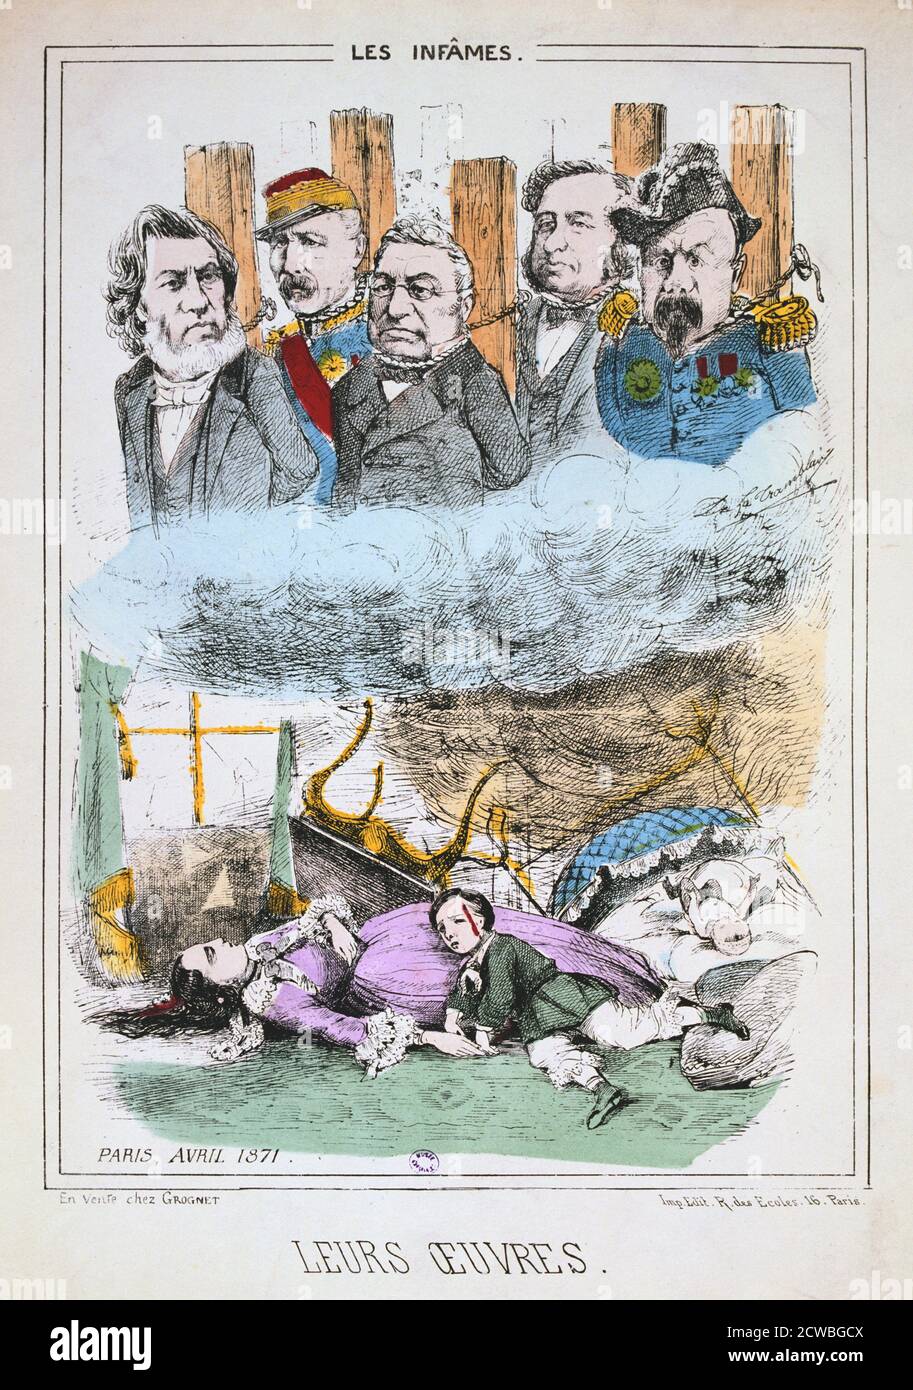 Les Infames', Paris Commune, April 1871. Anti-government cartoon portraying the leaders of the French government exiled to Versailles after the establishment of the Paris Commune being burnt at the stake for the crime of abandoning the bourgeois citizens of Paris to their fate at the hands of the left-wing Communards. From a private collection. Stock Photo